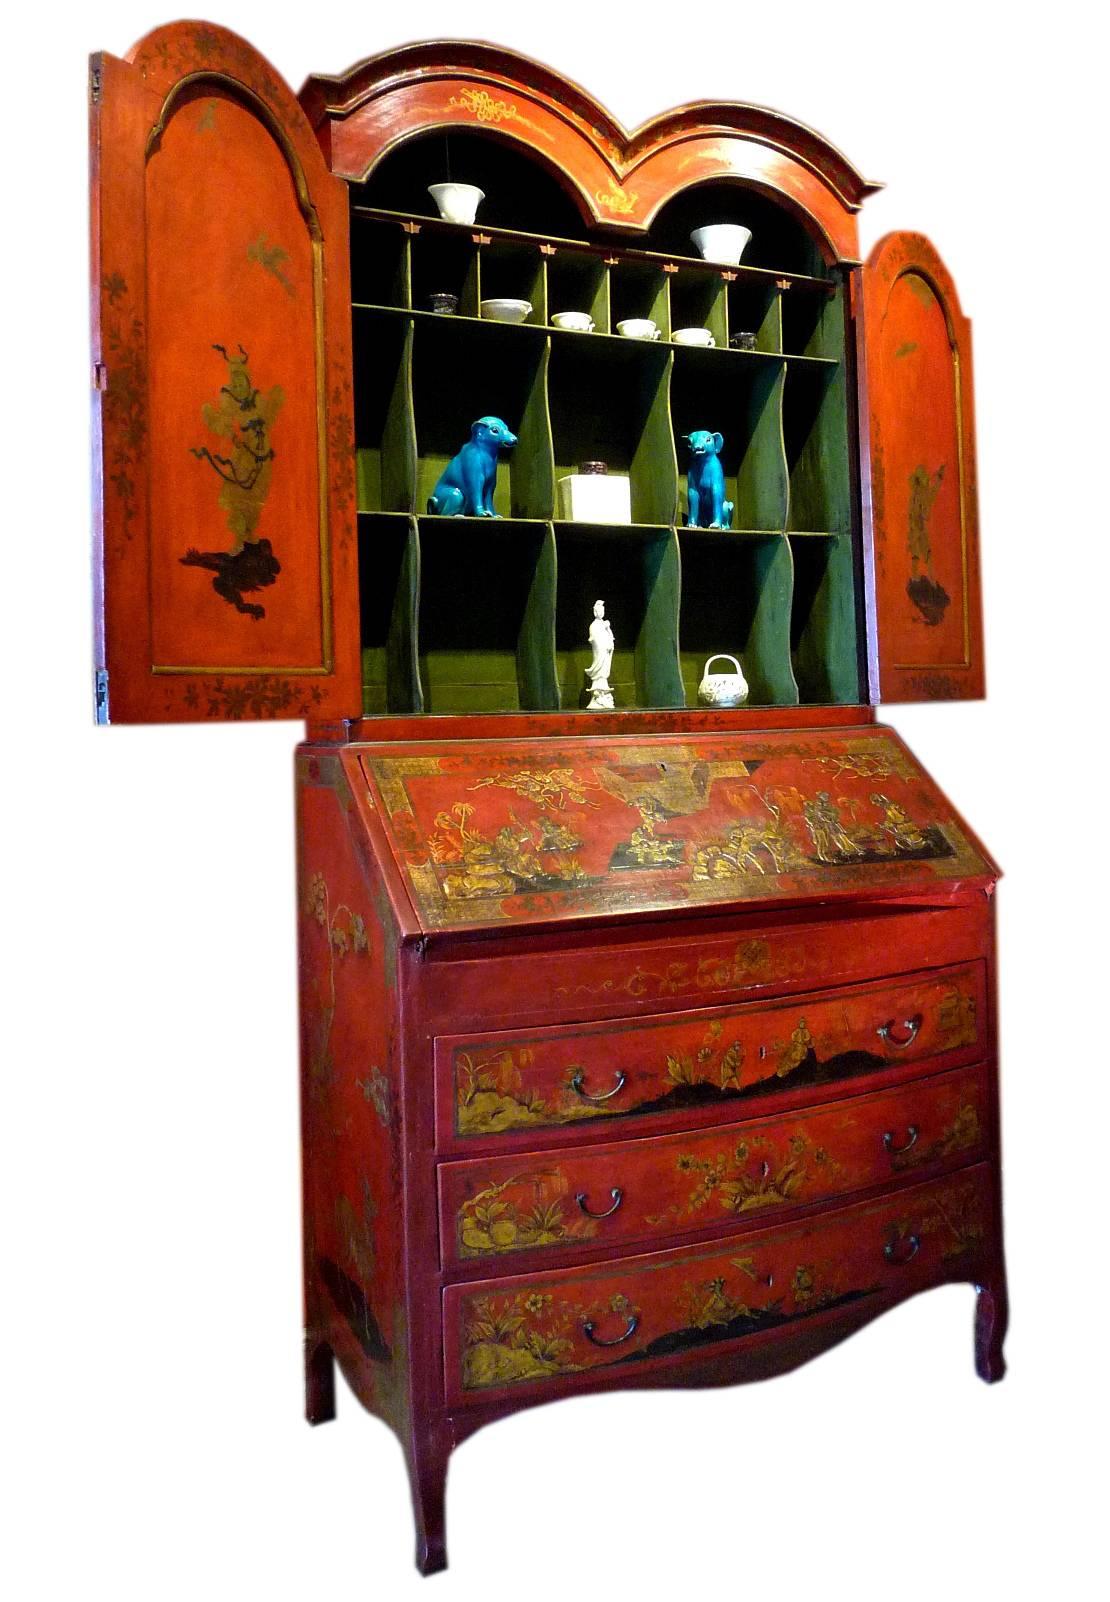 An English George II period chinoiserie red and gold painted bureau bookcase, in the style of Chinese lacquer, circa 1740-1750. 
Very close to creation of Giles Grendey (1693-1780.)